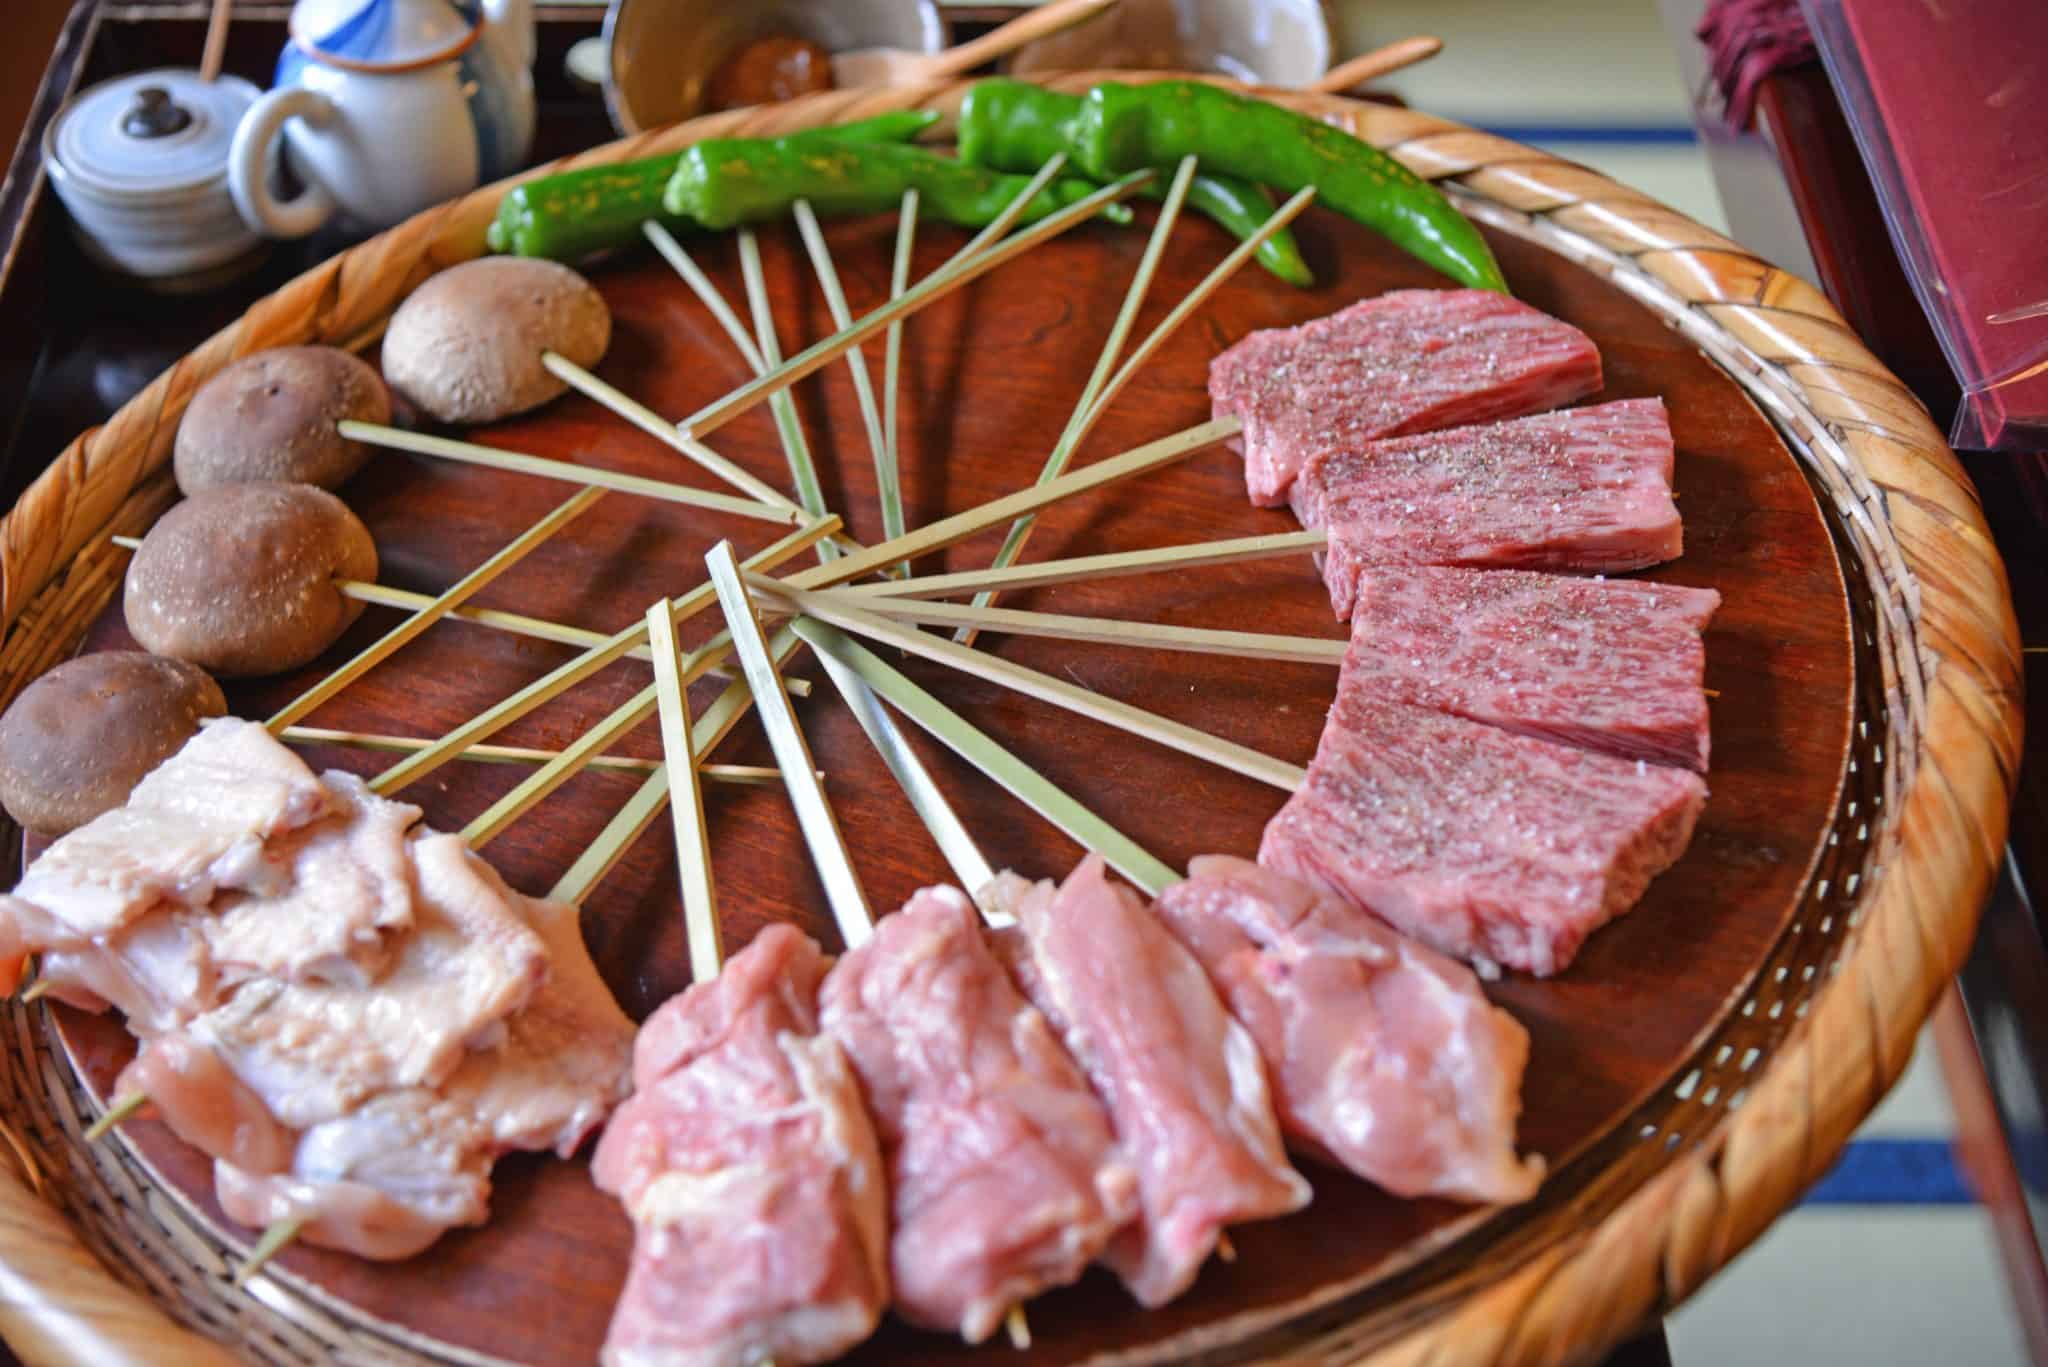 A plate of food on a table, with Beef